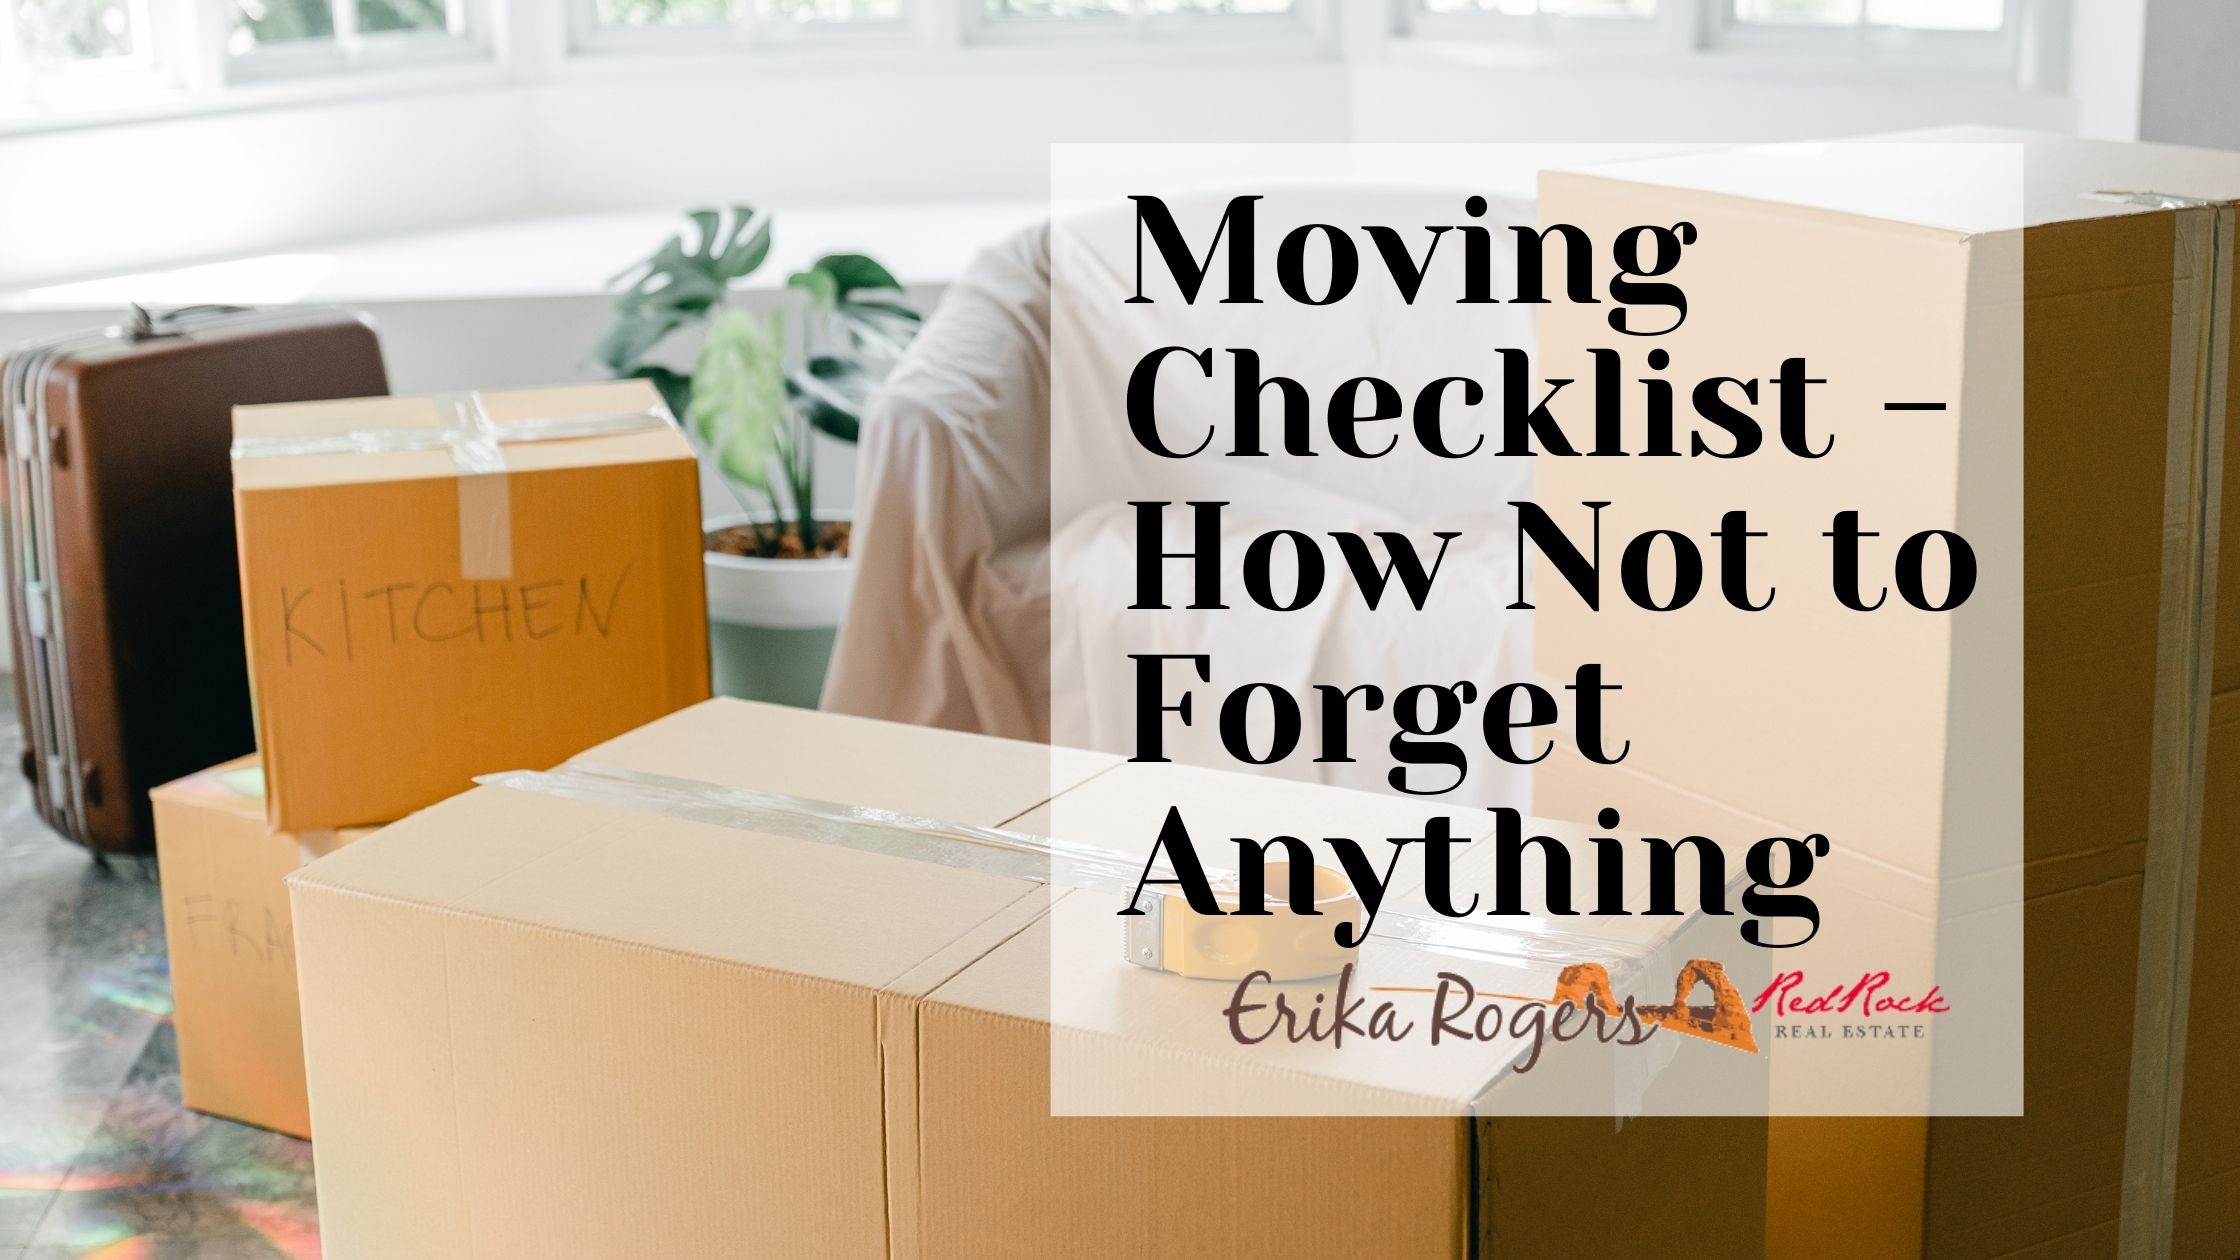 Moving Checklist – How Not to Forget Anything